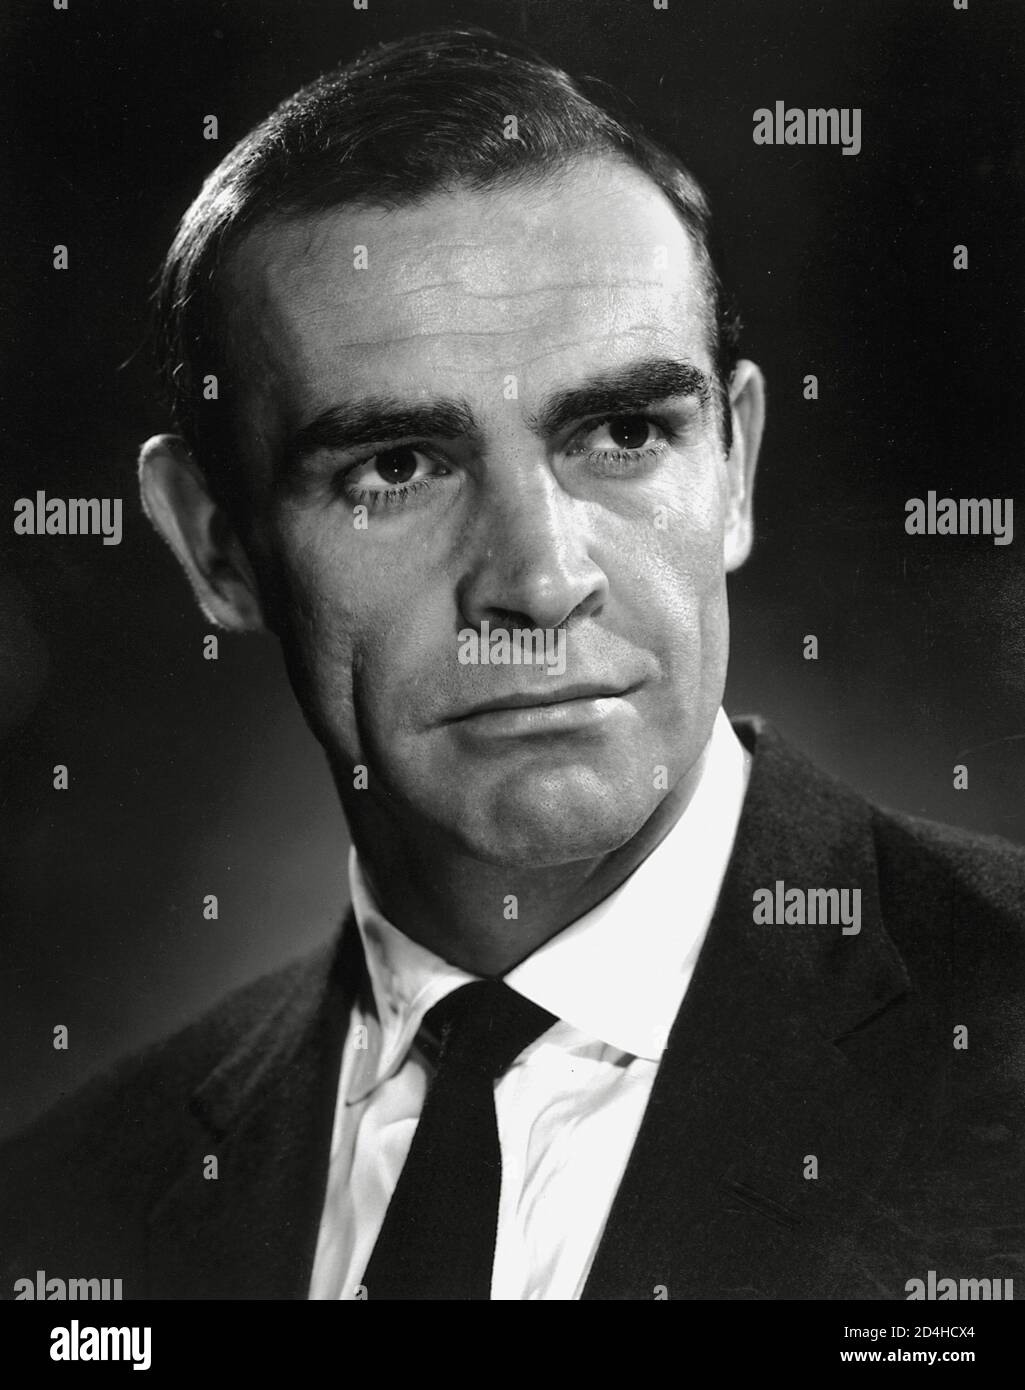 Sean Connery als James Bond Dr. No' (1962) United Artists / File Reference # 34000-644THA Stockfoto